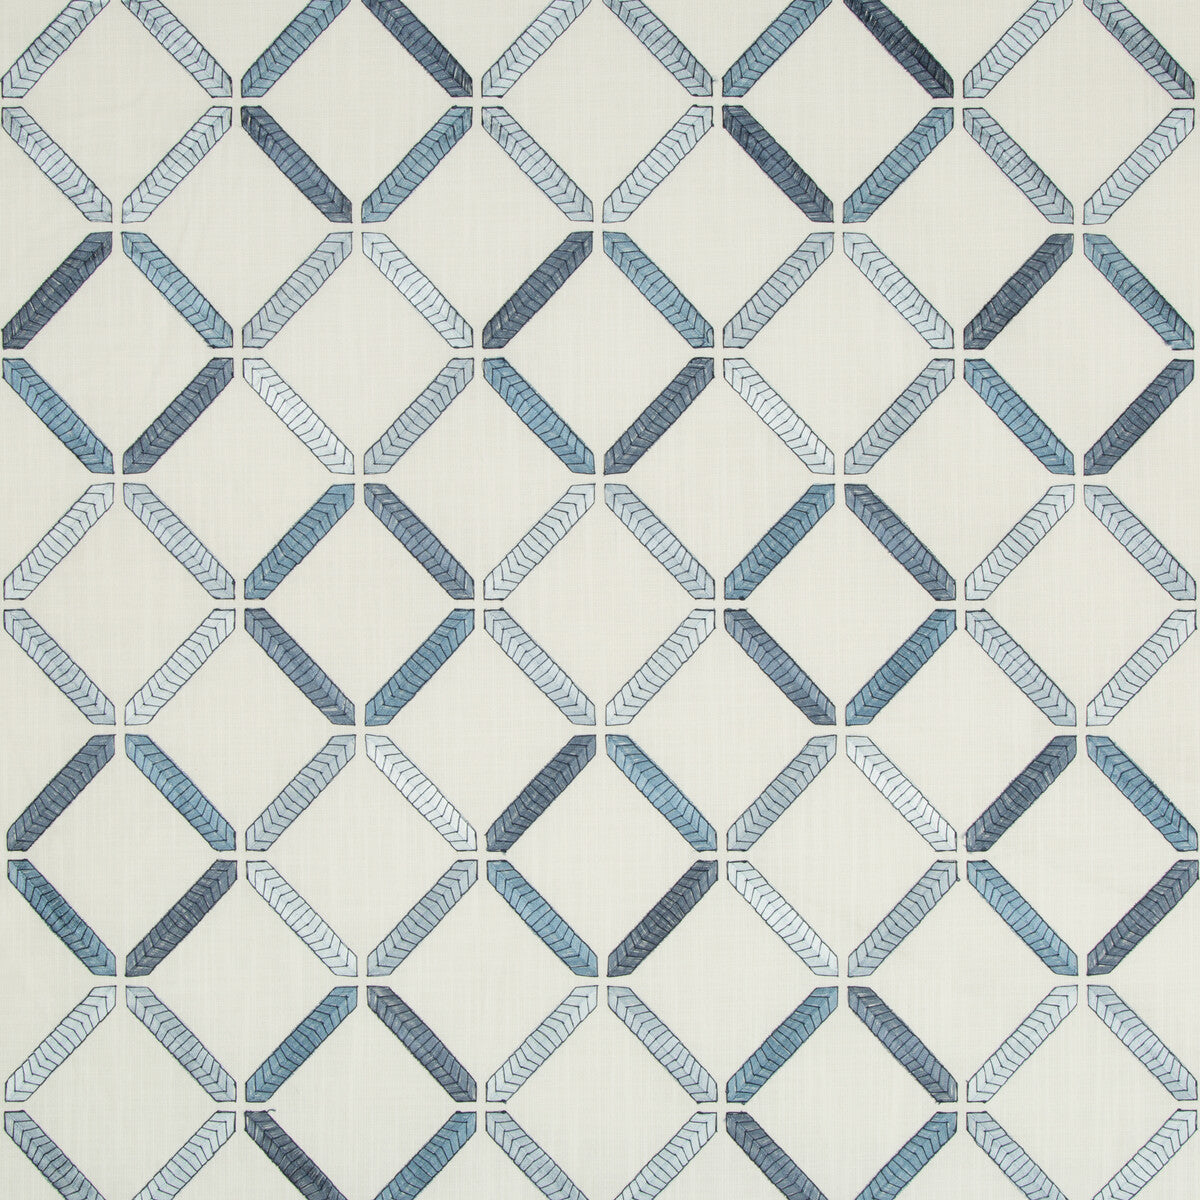 Kravet Basics fabric in 35275-50 color - pattern 35275.50.0 - by Kravet Basics in the Modern Embroideries III collection